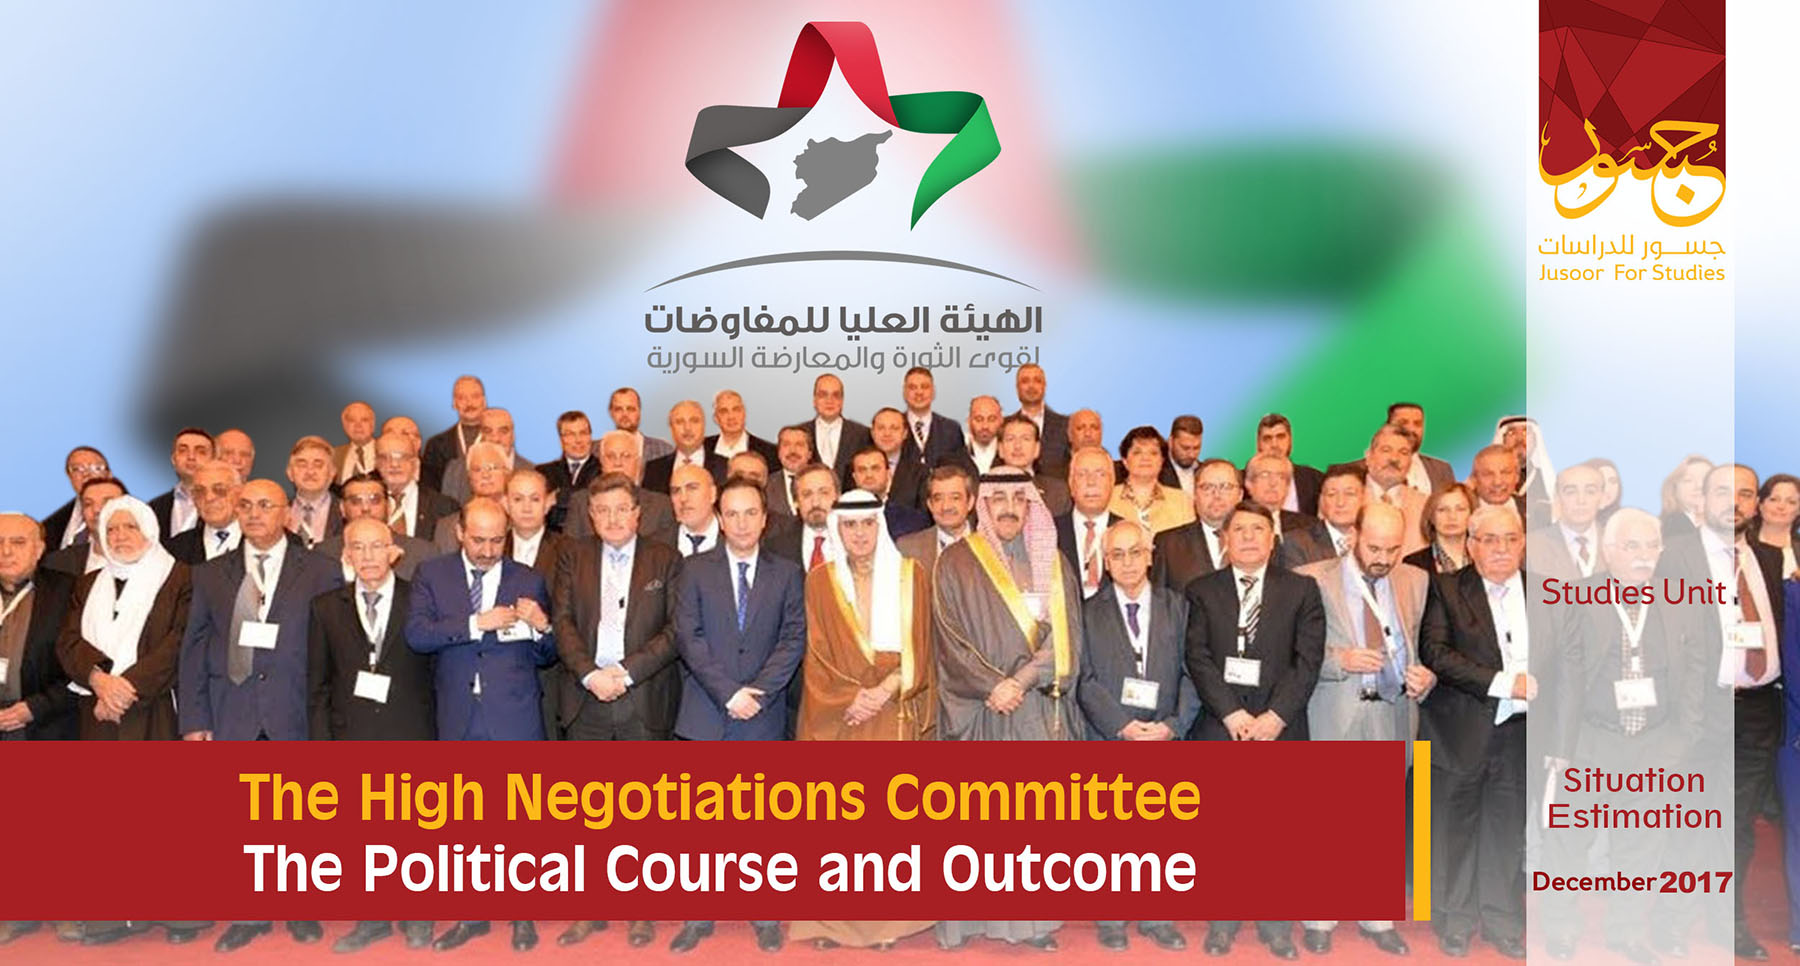 The High Negotiations Committee The Political Course and Outcome